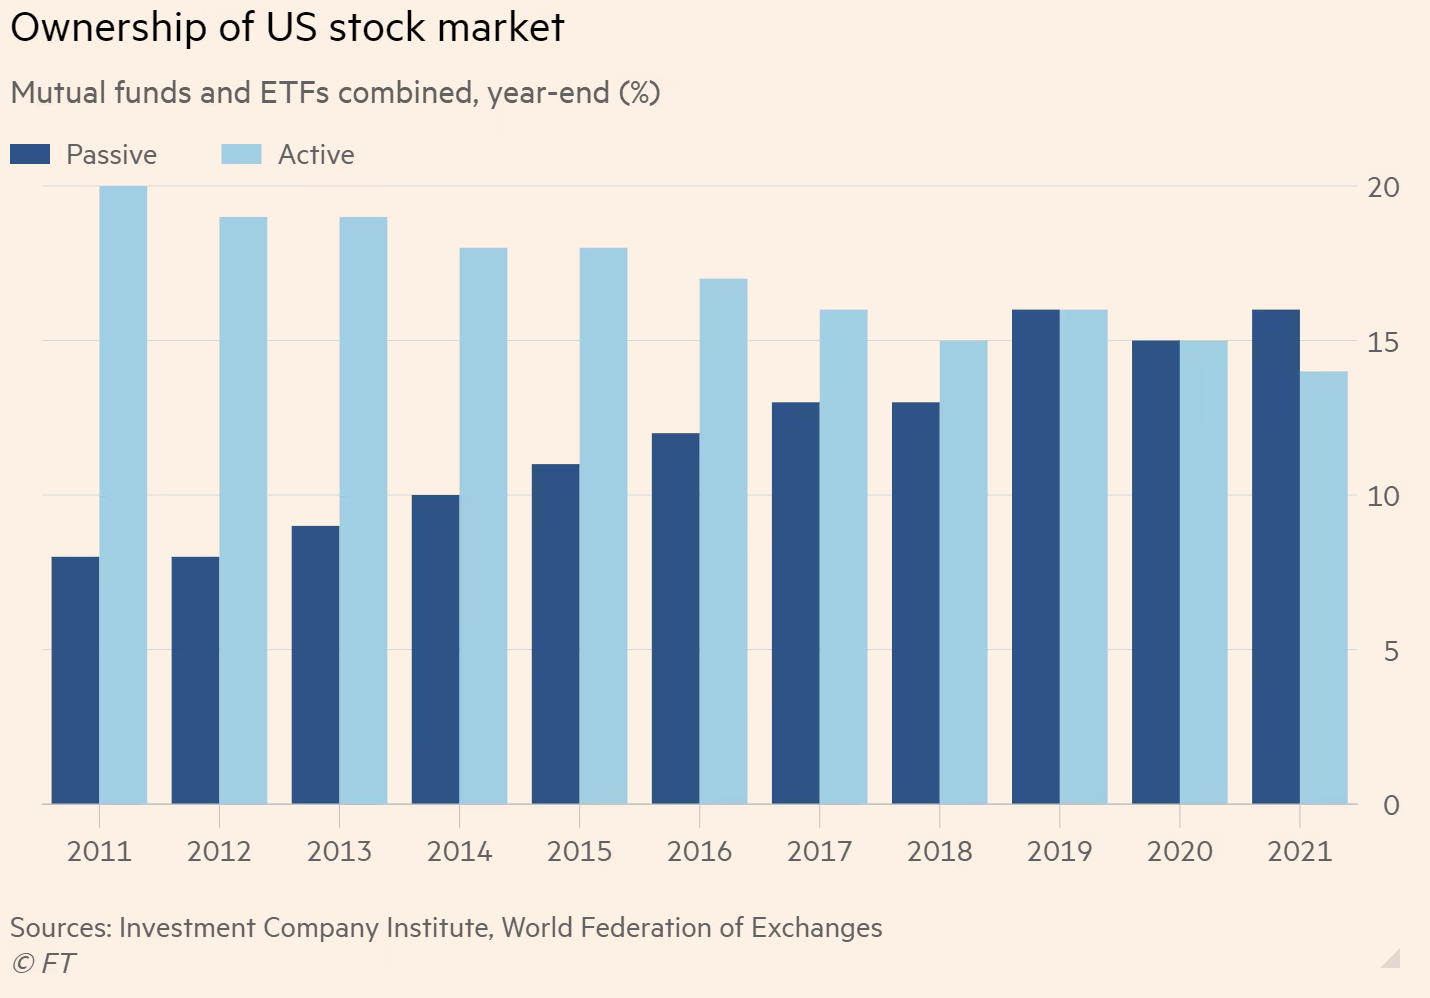 Chart showing the US stock market ownership.